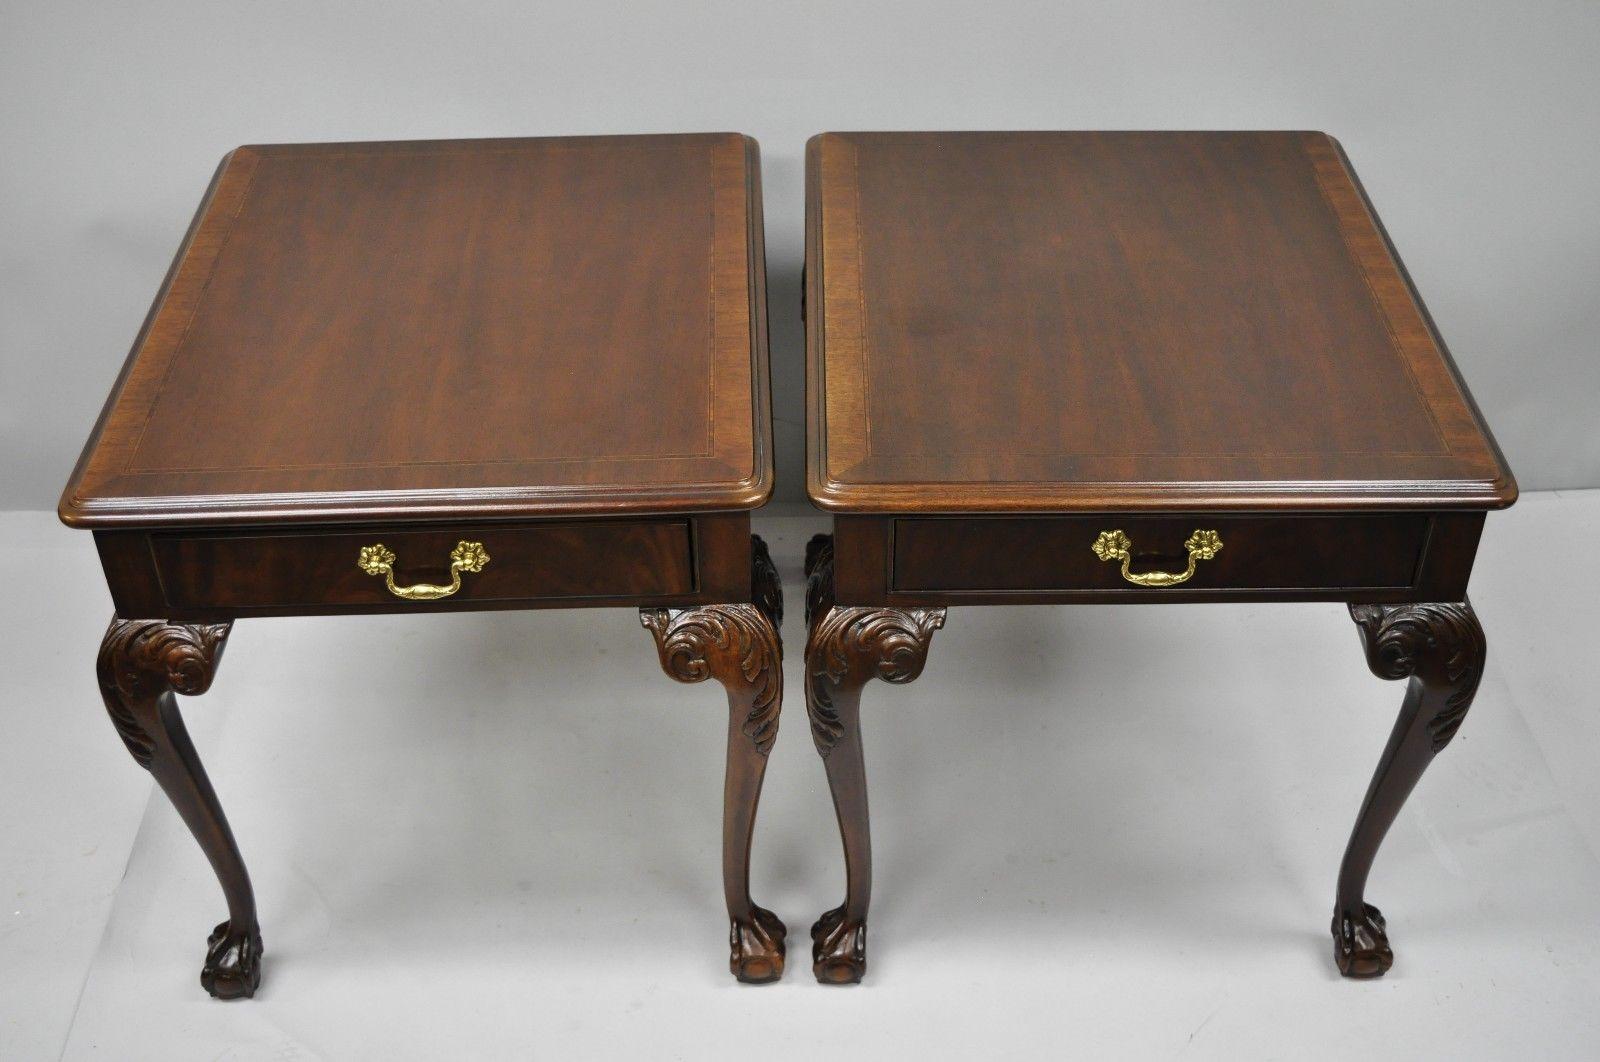 Pair of Drexel Heritage Chippendale style ball and claw mahogany end tables. Item features solid wood construction, beautiful wood grain, serial number #074-326, nicely carved details, finished back, one dovetailed drawer, cabriole legs, solid brass